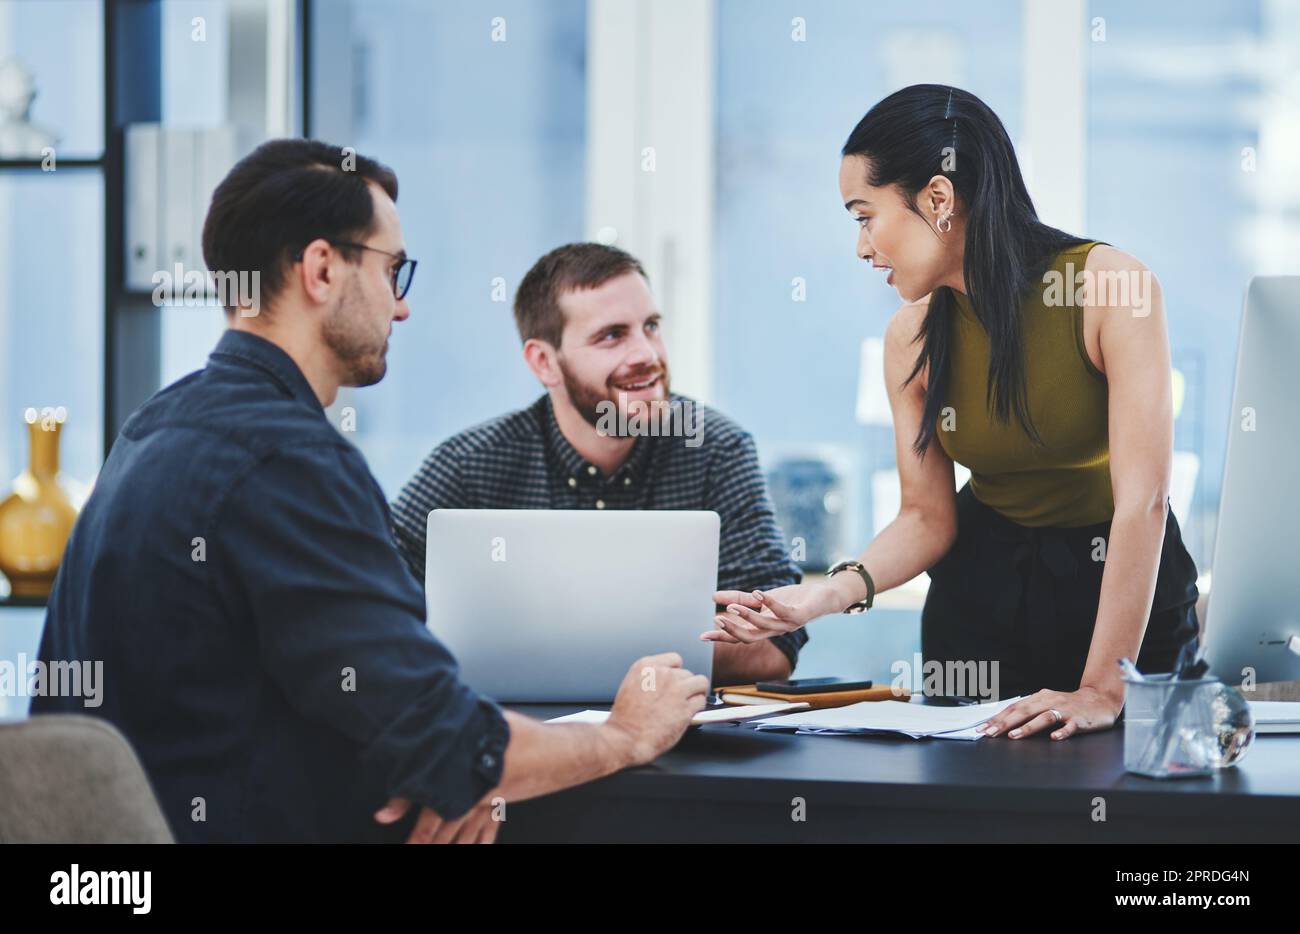 Moving their agency forward together. a group of young designers having a discussion in an office. Stock Photo